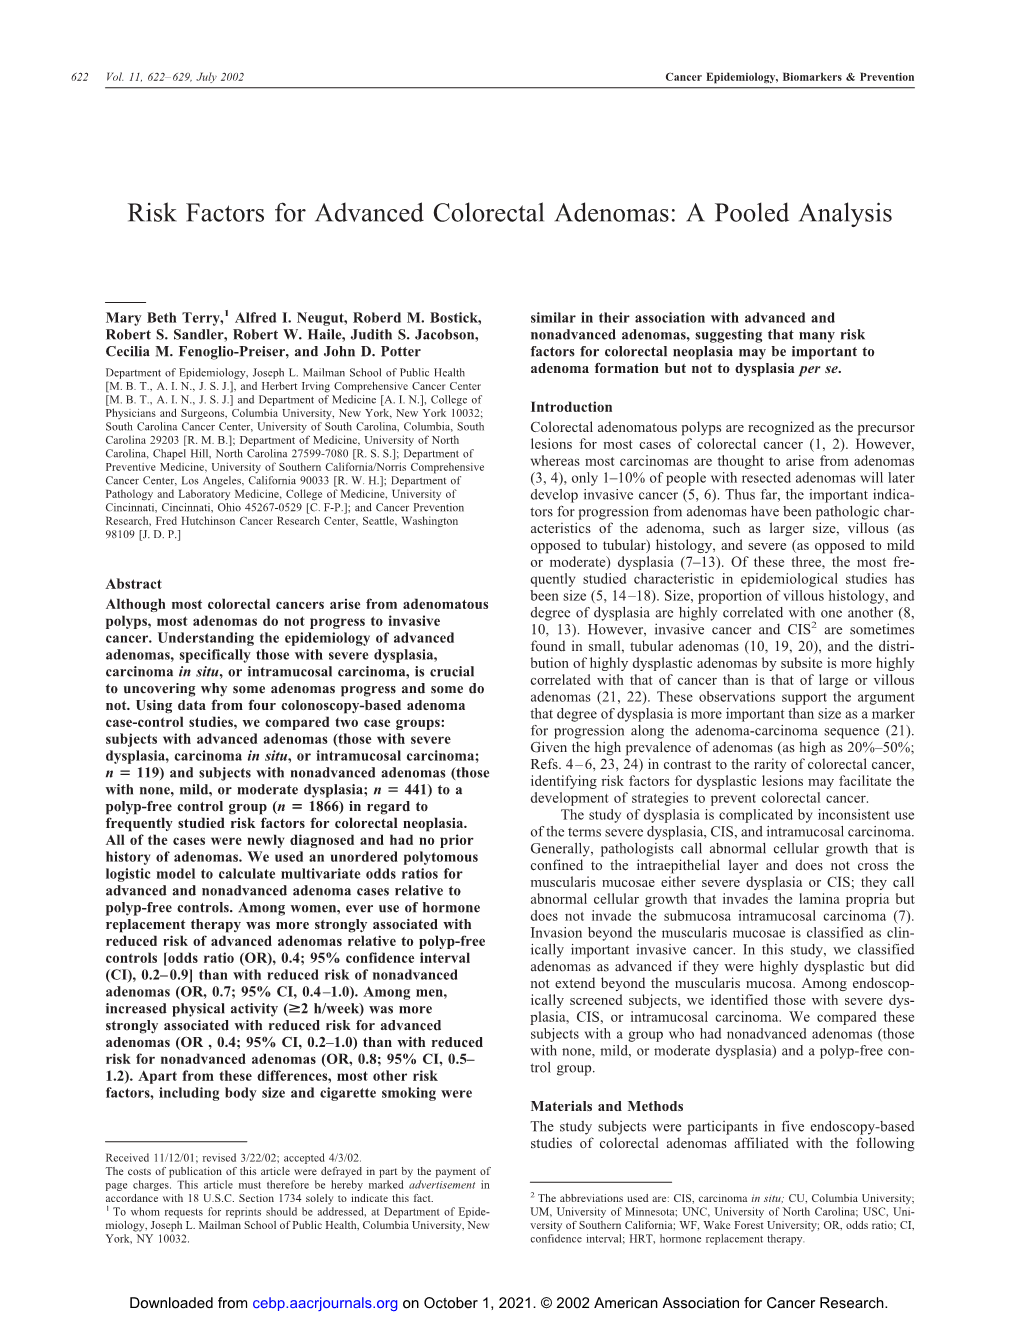 Risk Factors for Advanced Colorectal Adenomas: a Pooled Analysis